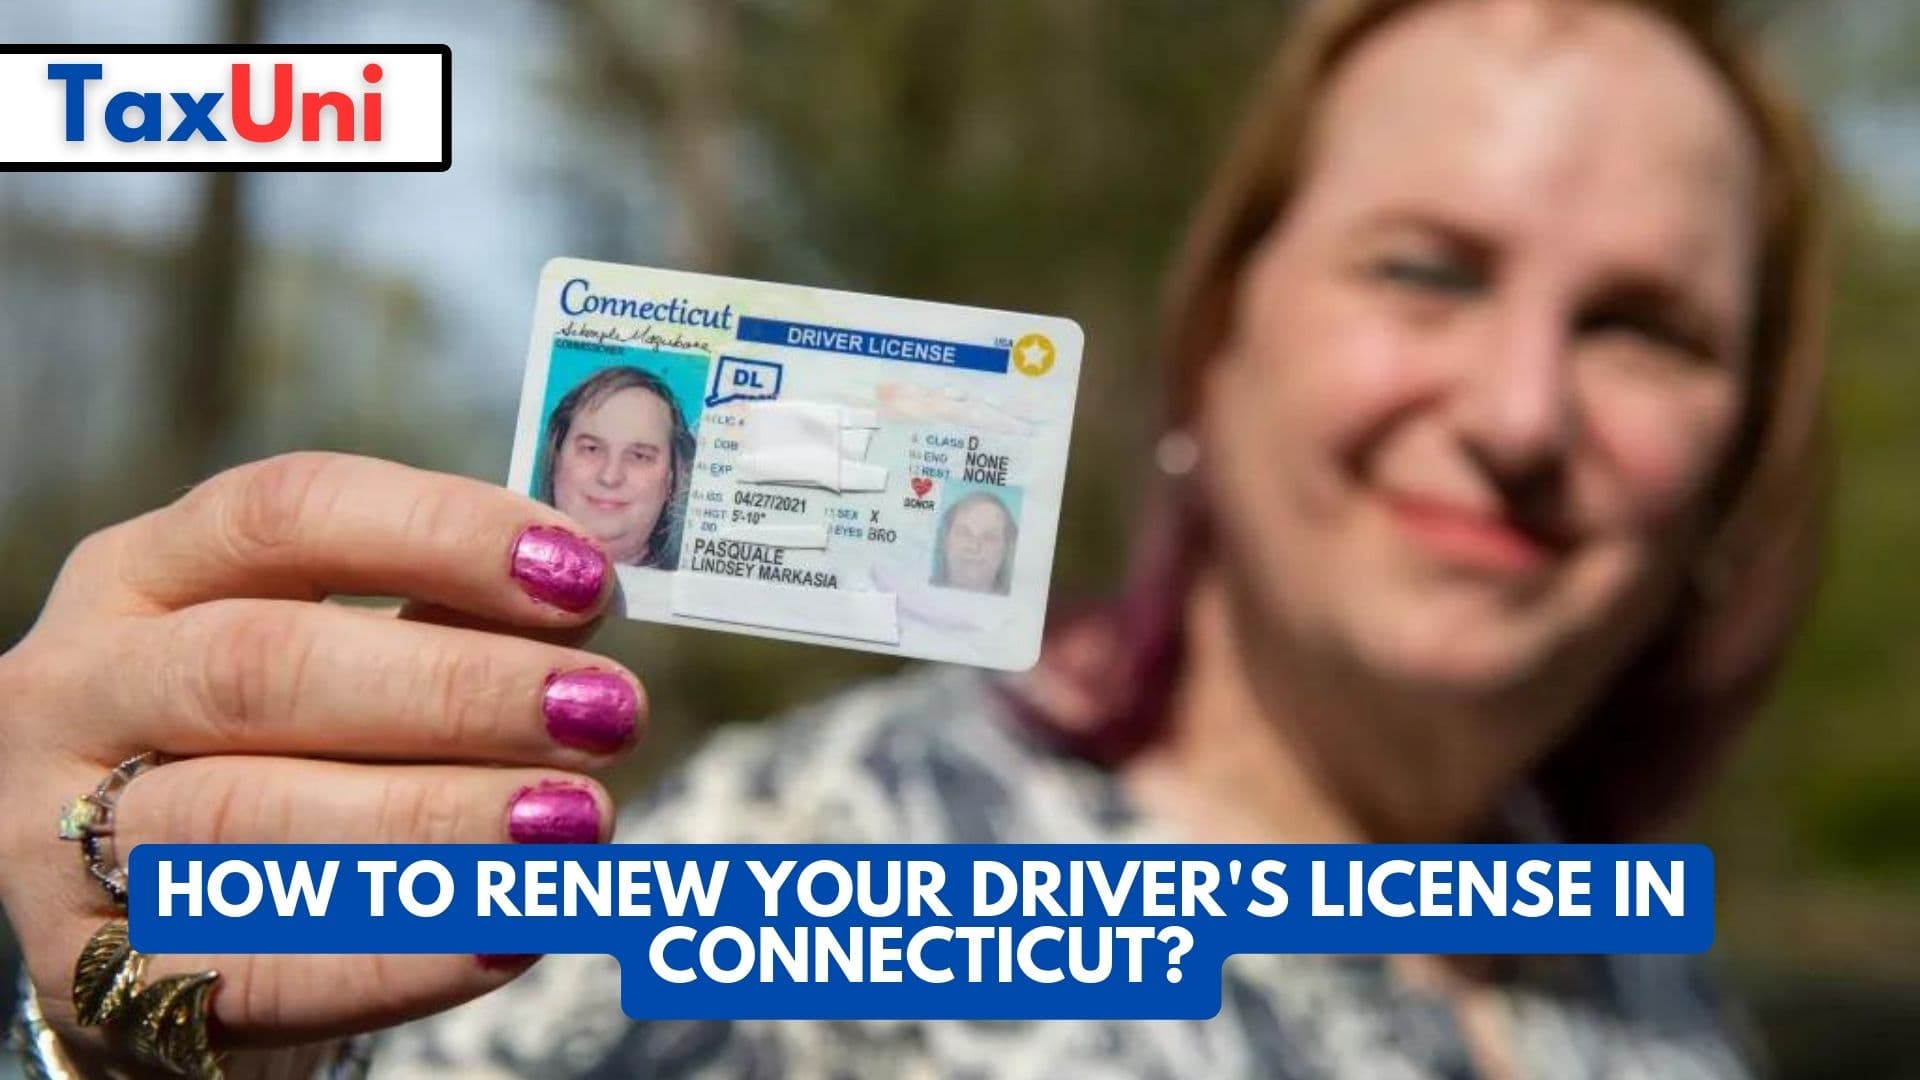 How to Renew Your Driver's License in Connecticut